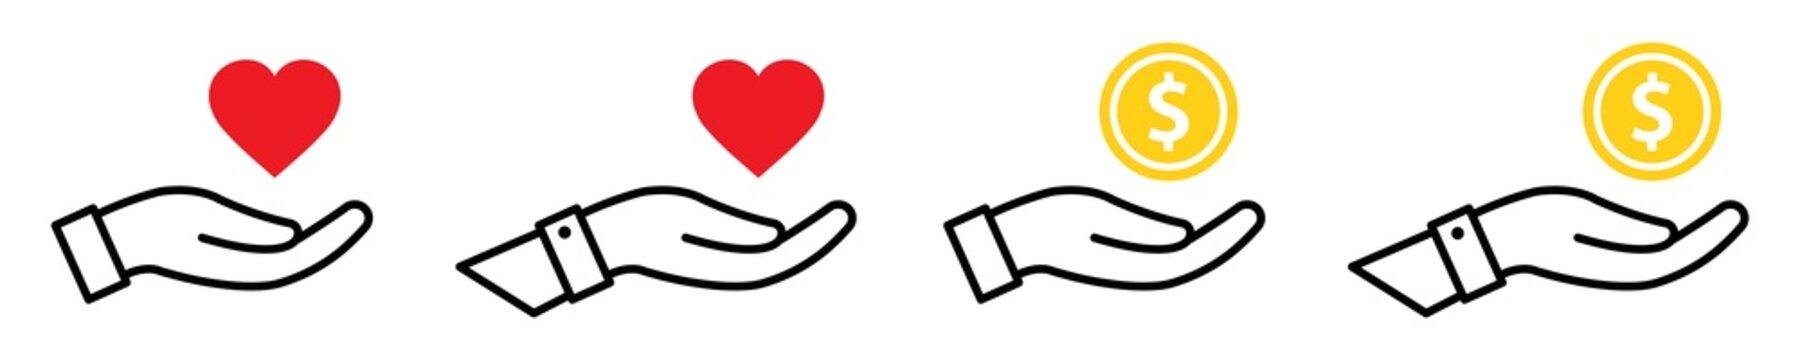 Heart and money in hand icon. Donate icon. Charity icon, vector illustration